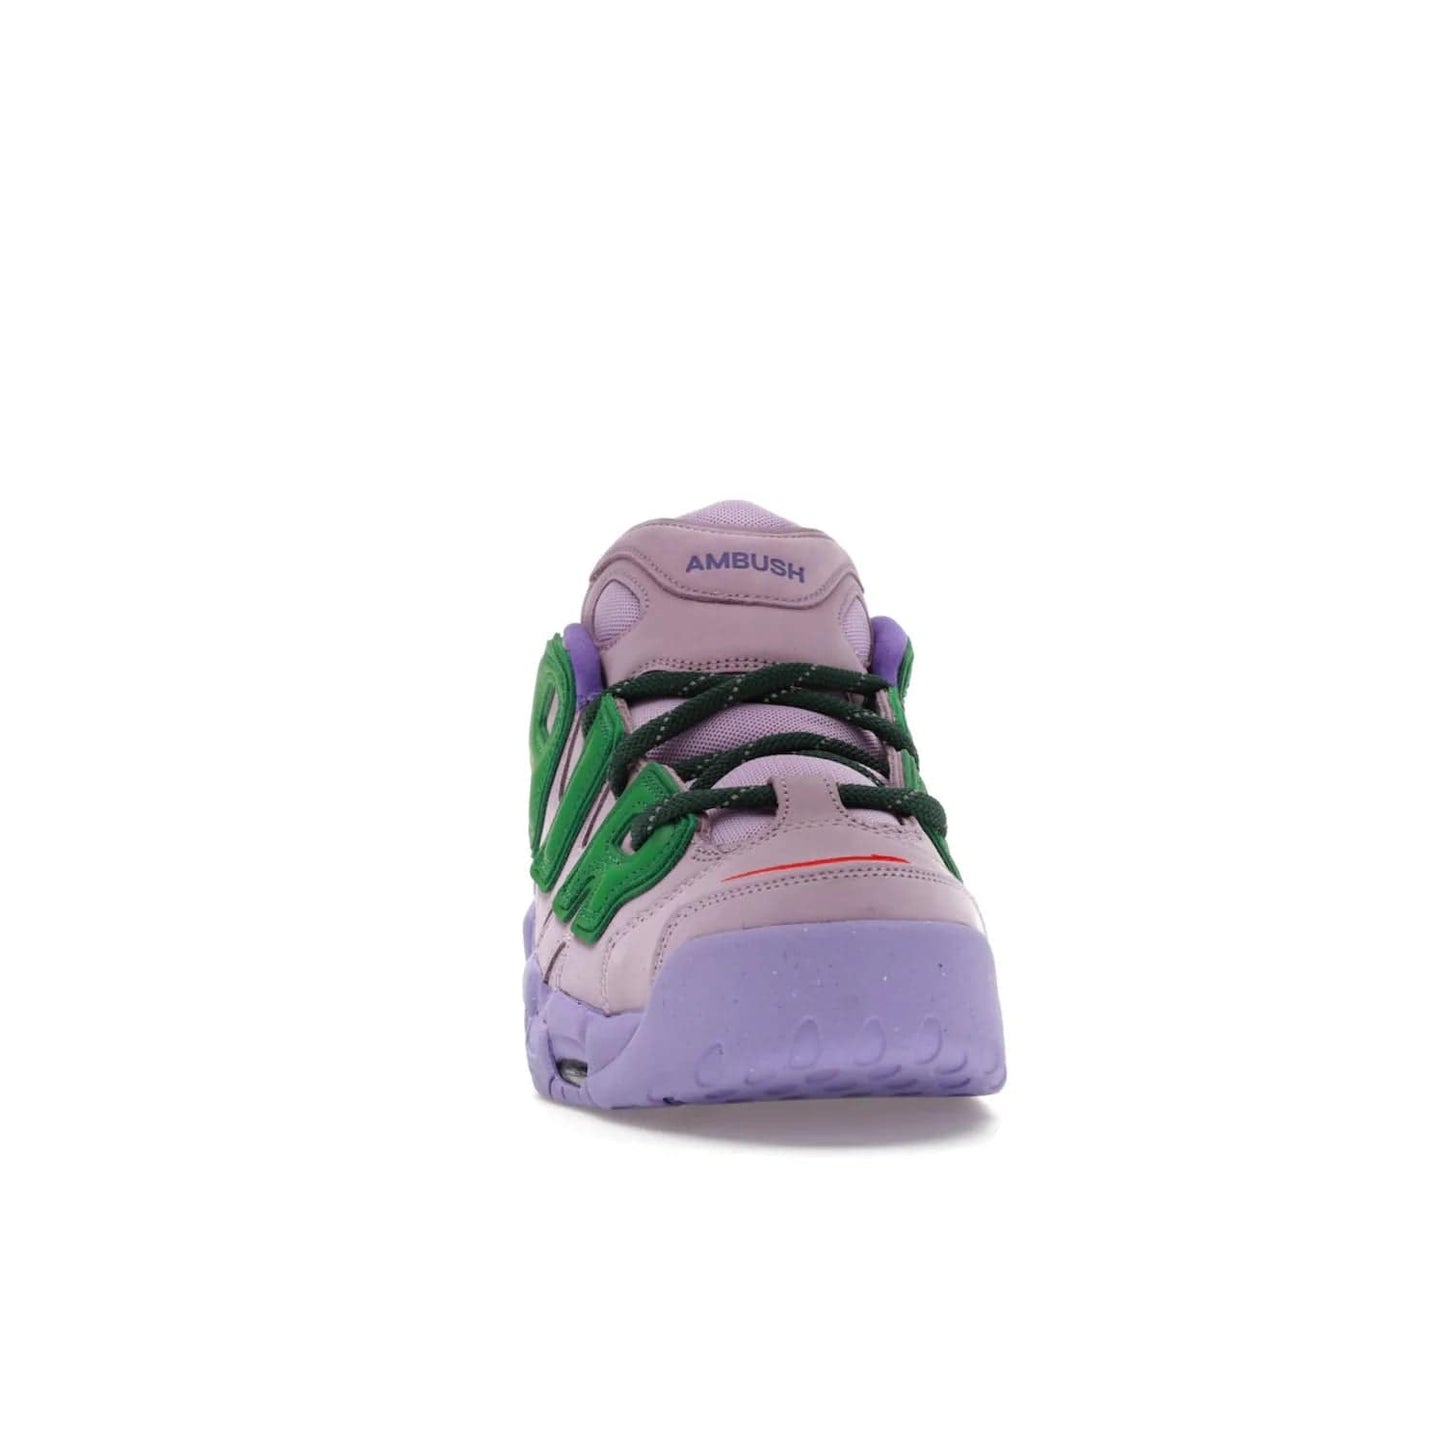 Nike Air More Uptempo Low AMBUSH Lilac - Image 9 - Only at www.BallersClubKickz.com - Style and comfort meet with the Nike Air More Uptempo Low AMBUSH Lilac. Featuring a vibrant Lilac upper with Apple Green and University Red accents, this unique design will be a standout in any wardrobe. Get your pair on October 06, 2023.